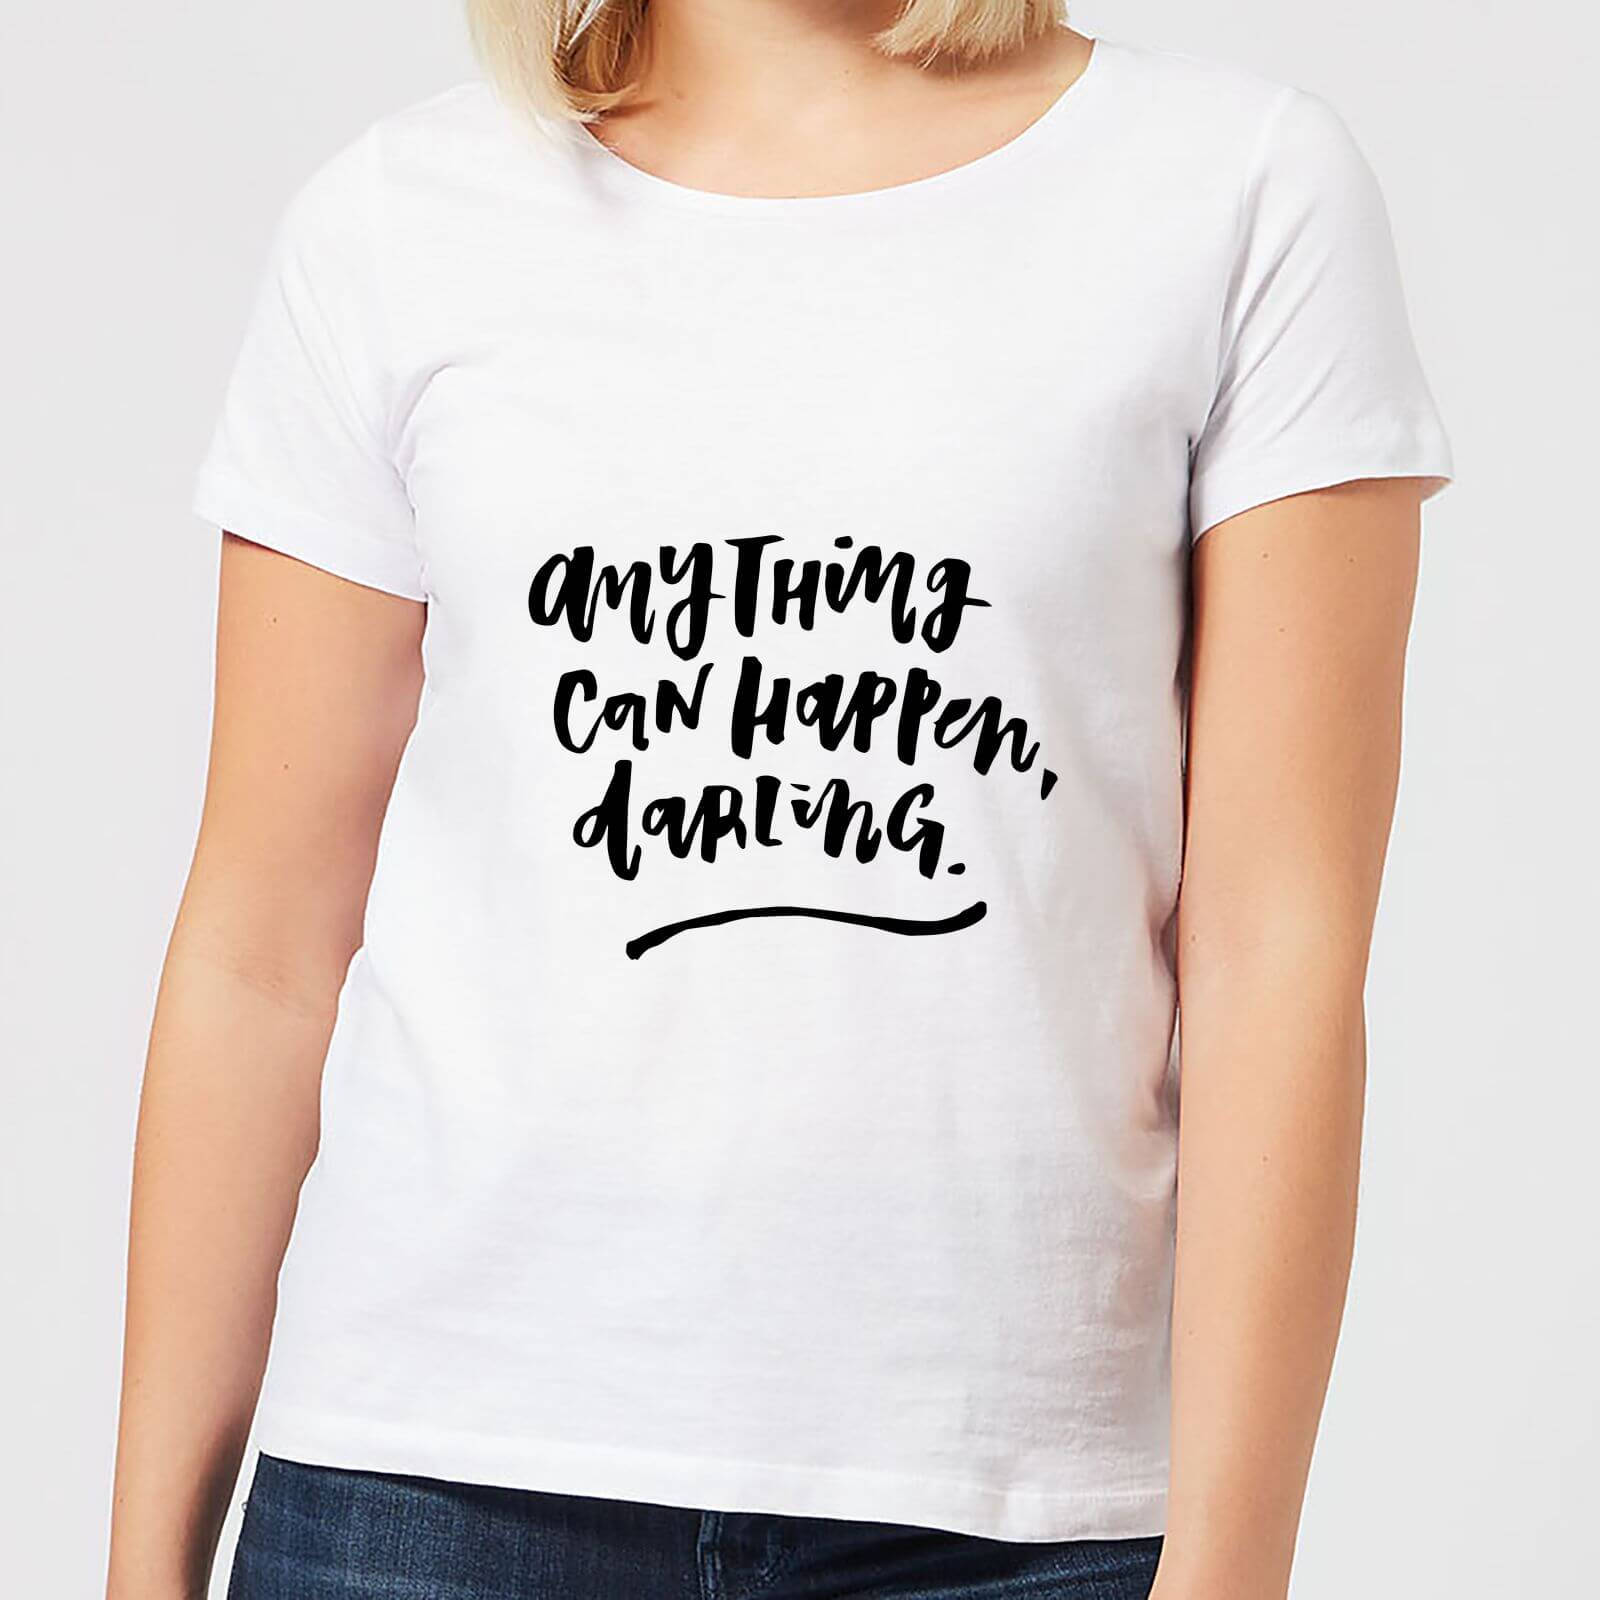 Anything Can Happen, Darling. Women's T-Shirt - White - S - White